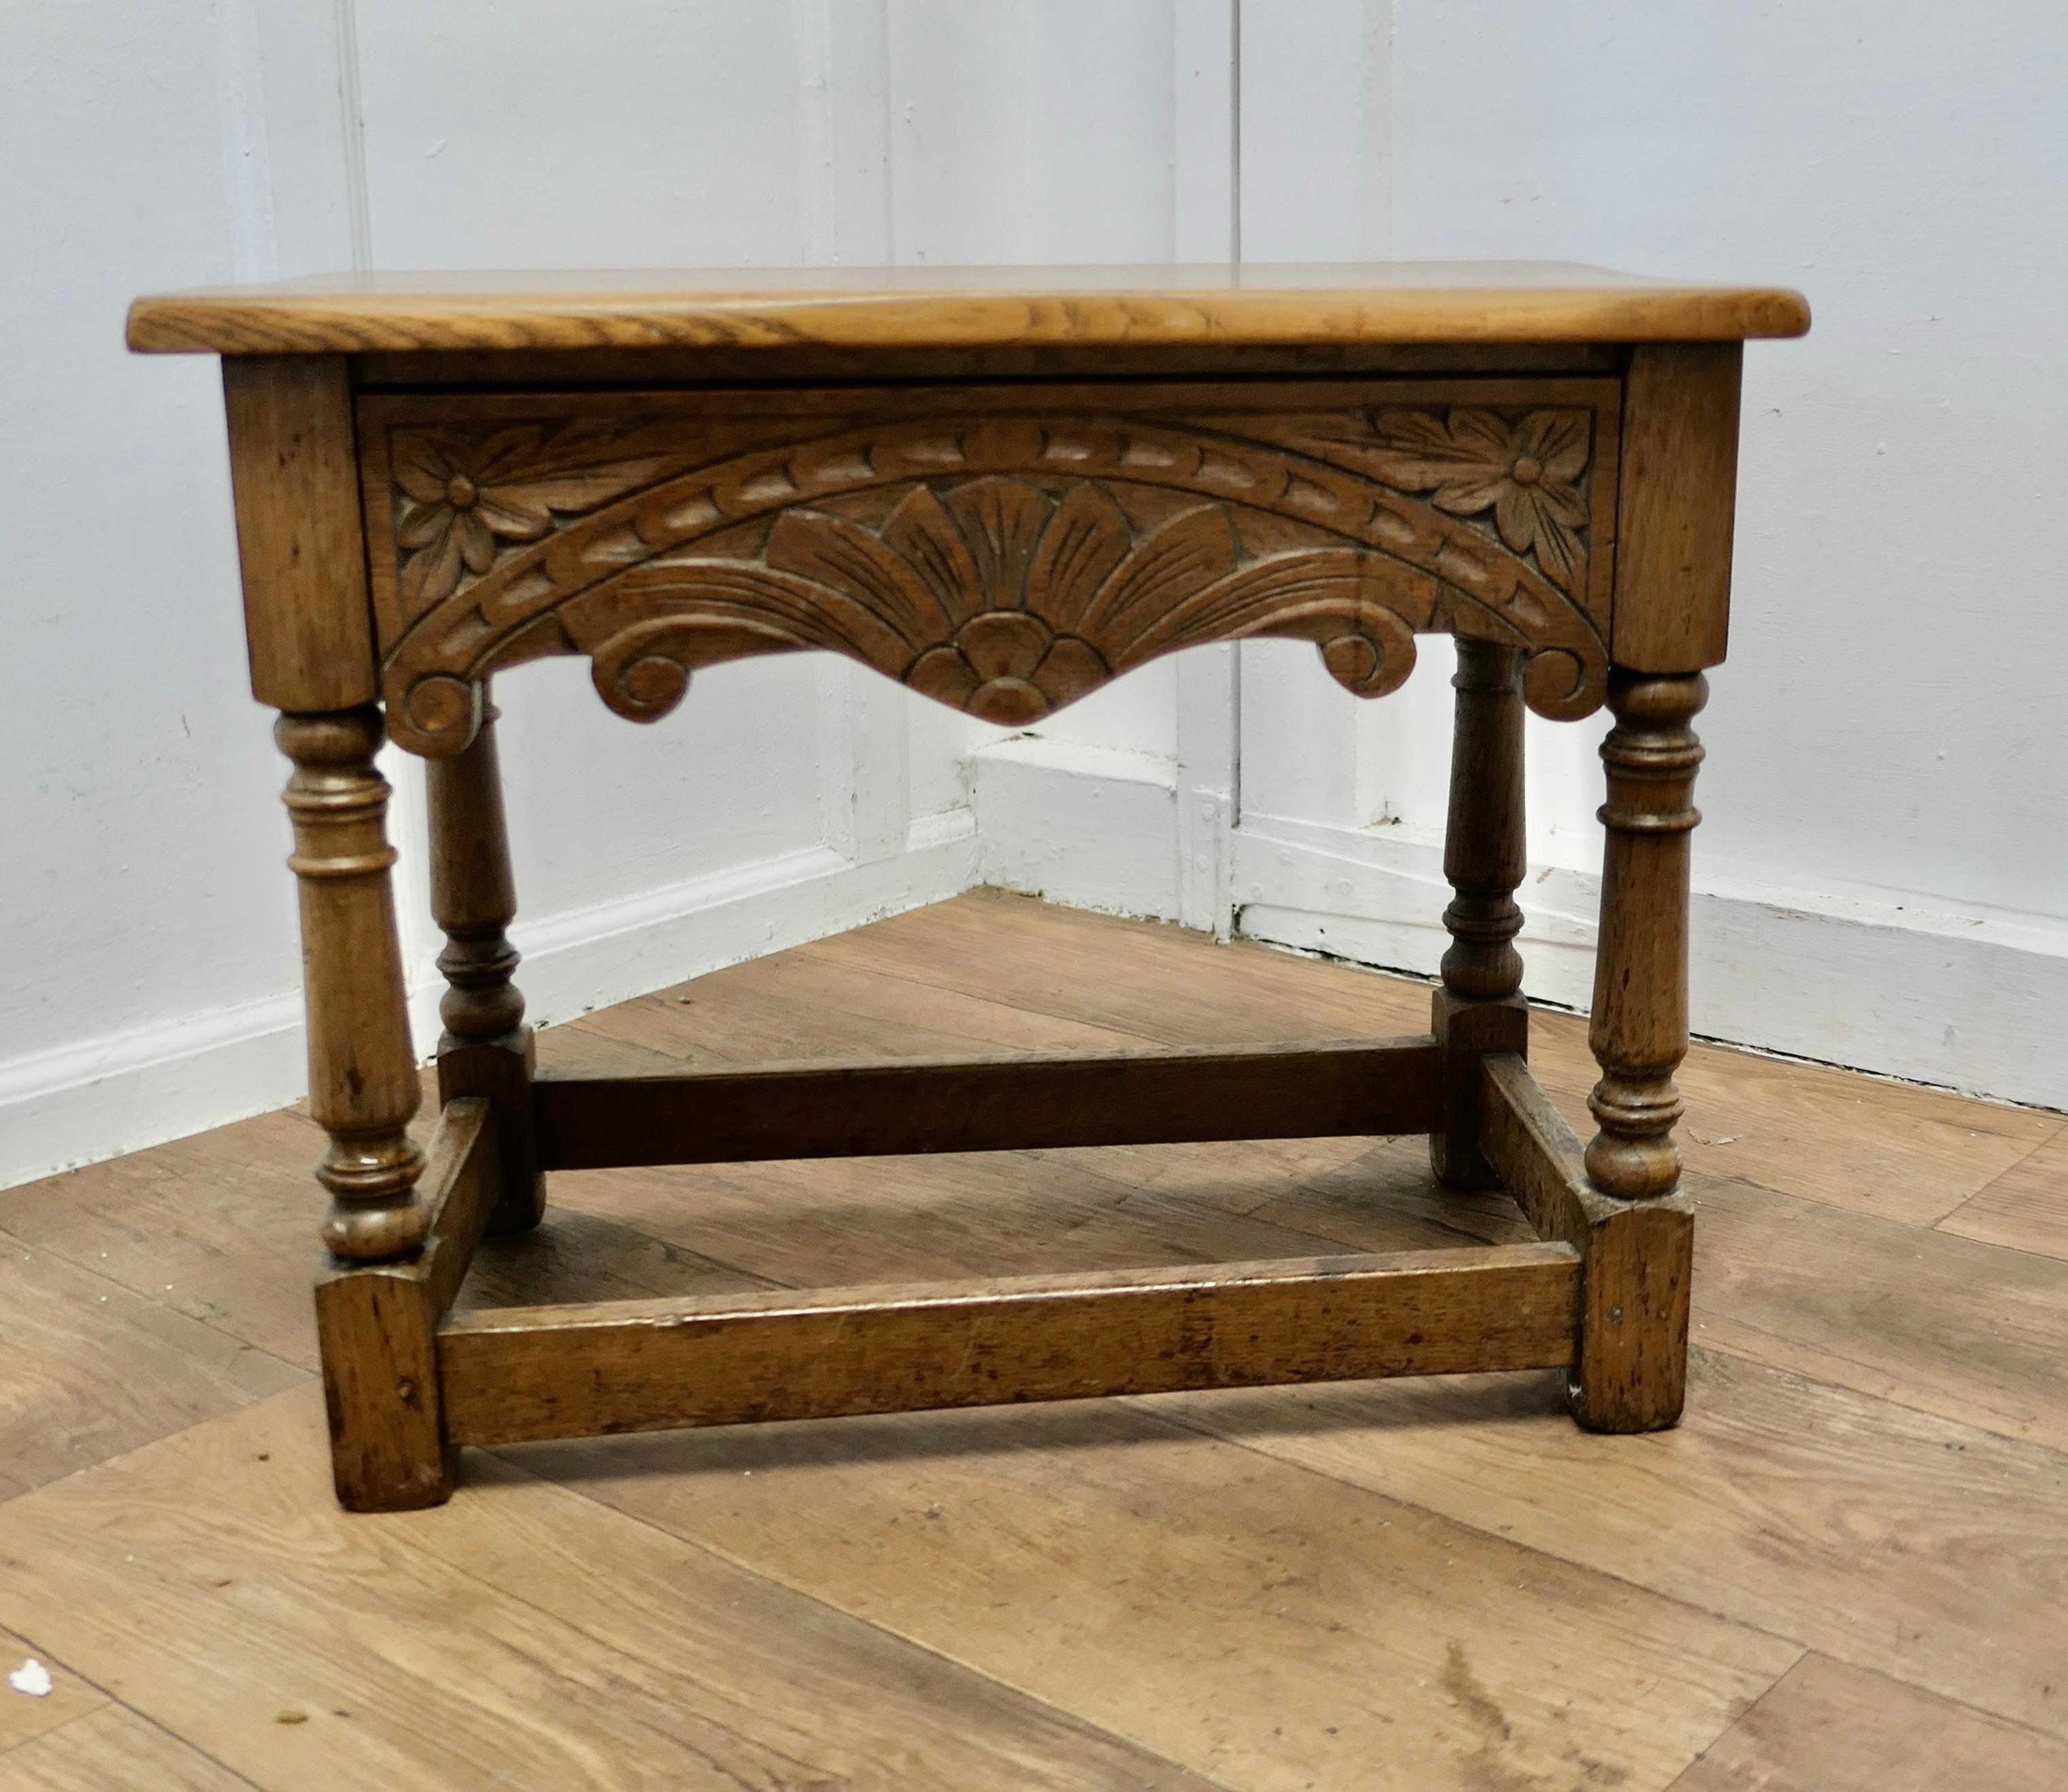 Arts and Crafts Oak Joint Stool, Occasional Table with Drawer

This a good Golden Oak Joint or Joined Stool with a carved frieze which is a drawer for storage 
This is a good solid stool, in good condition with a good colour
The stool is 19” high,